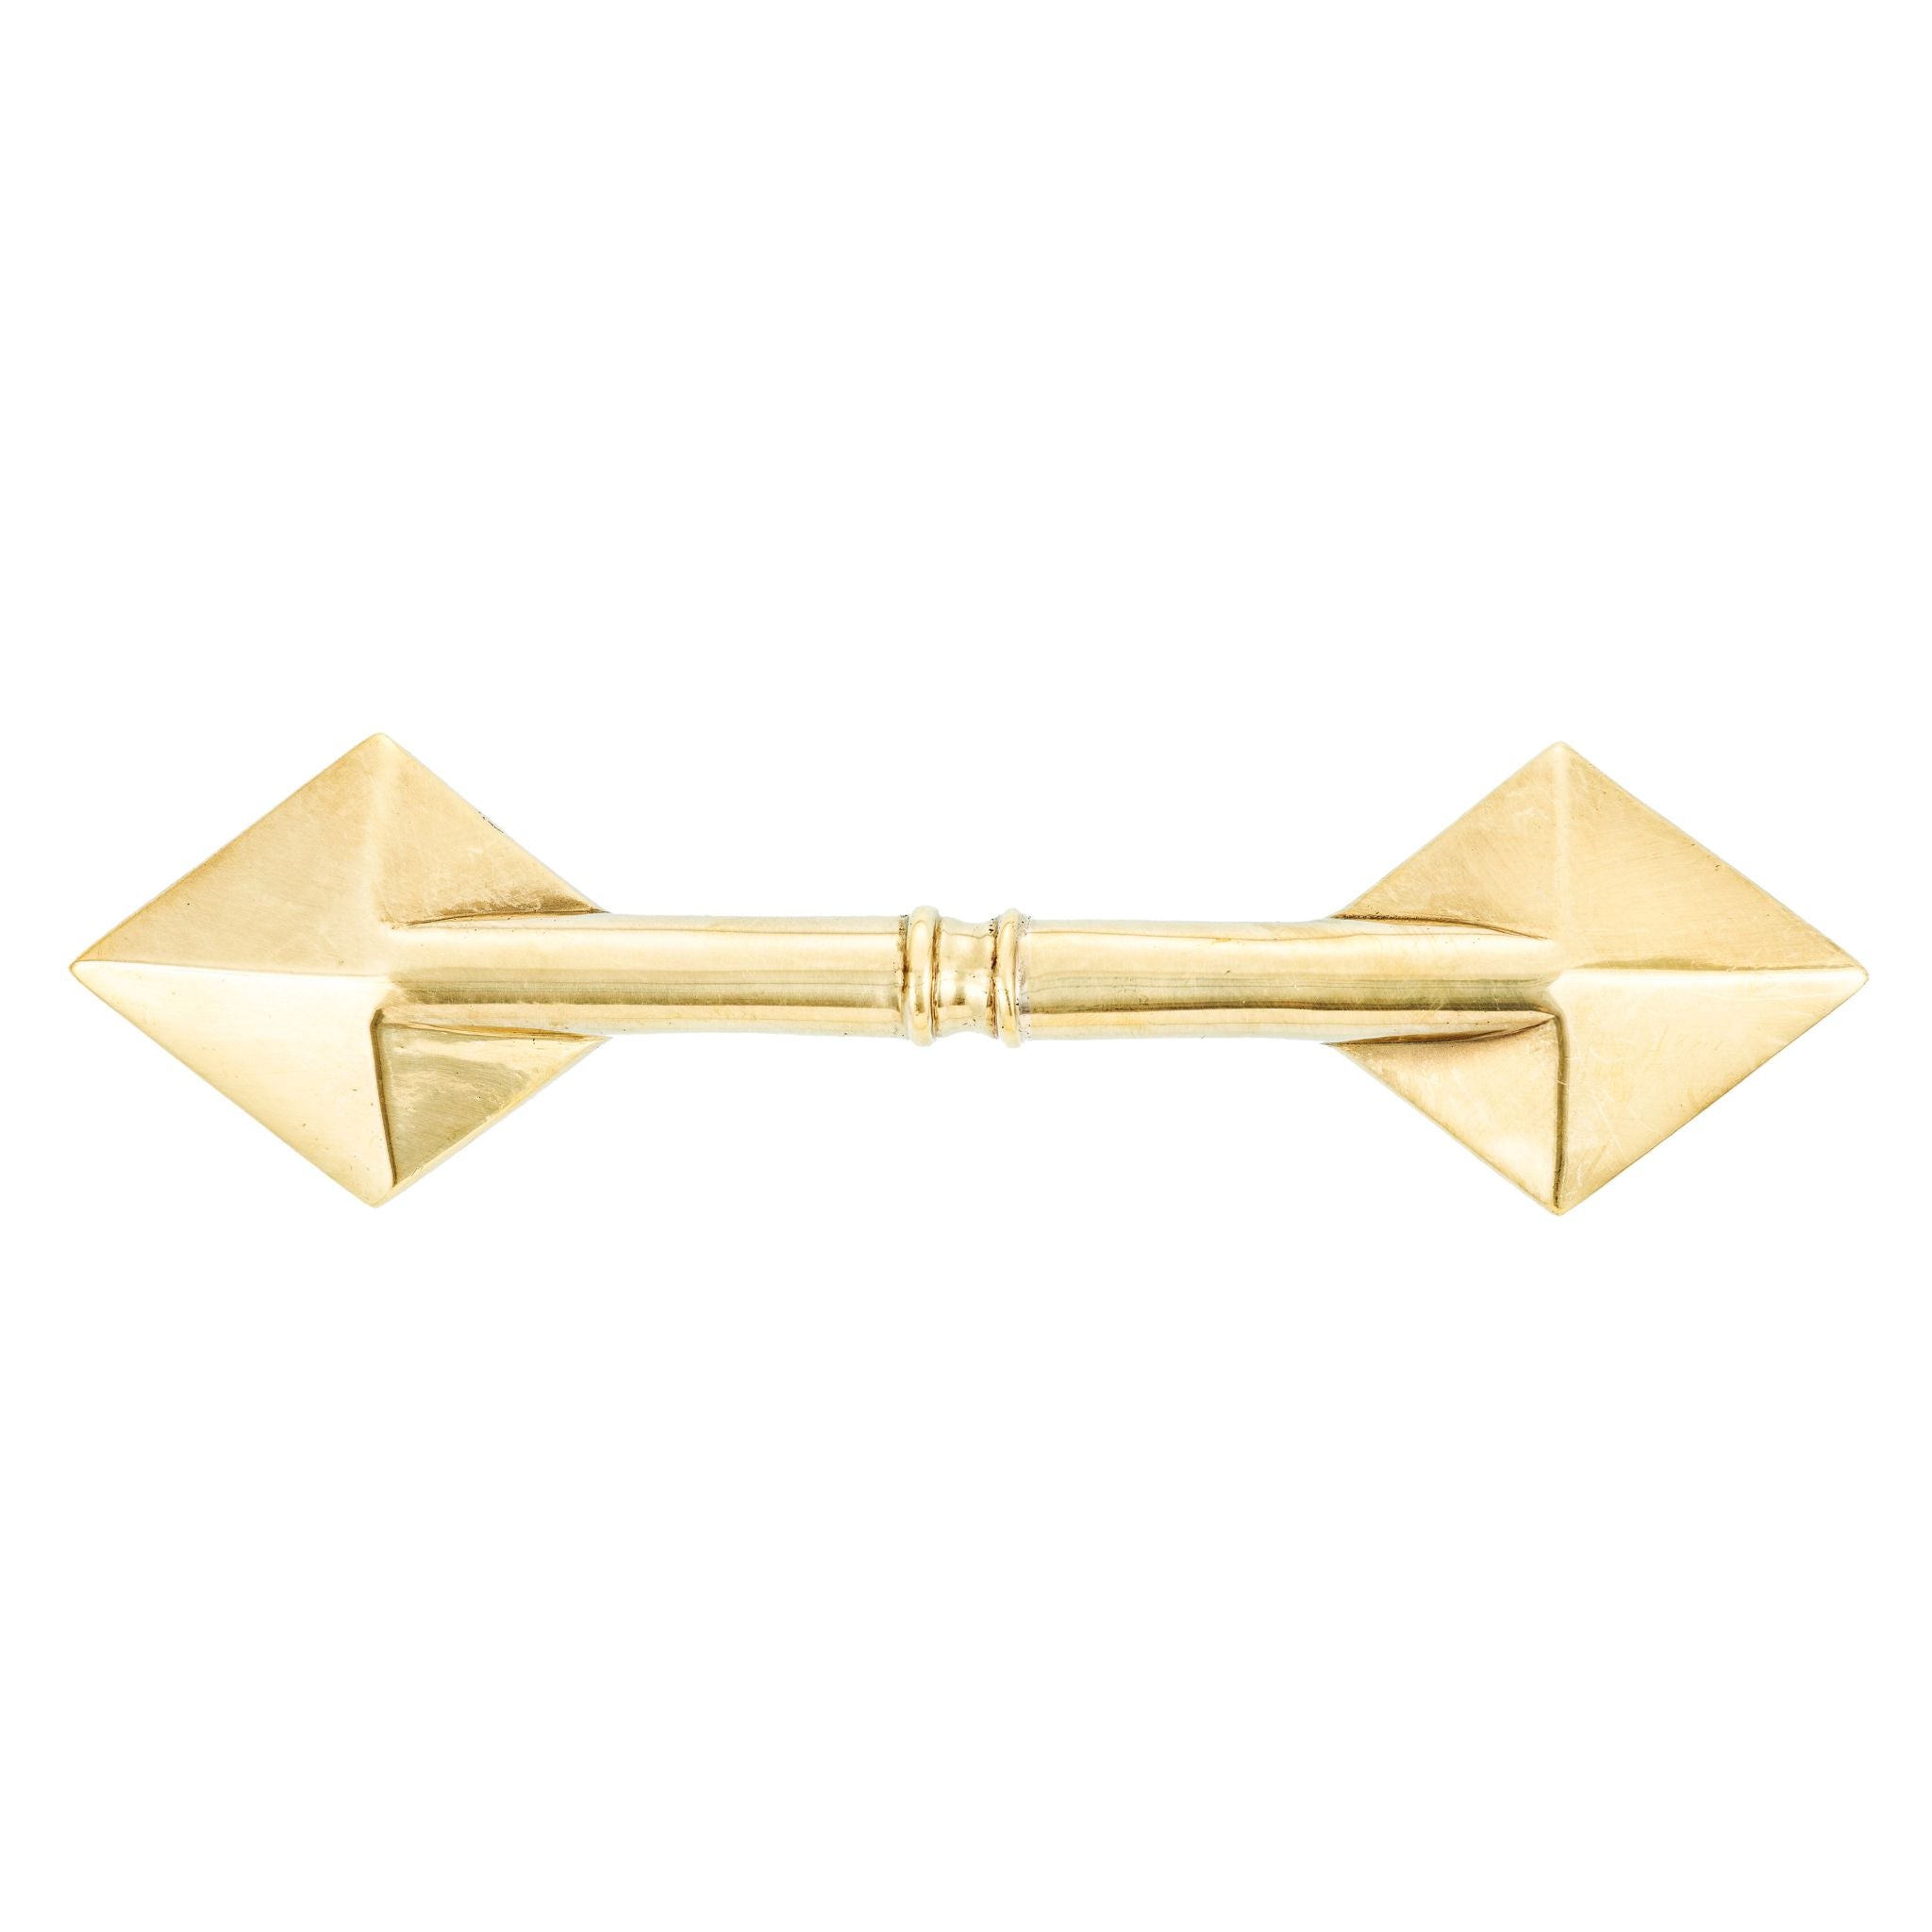 Brass knob with a polished finish, suitable for cabinets, drawers, and doors, adding timeless elegance to your home decor.